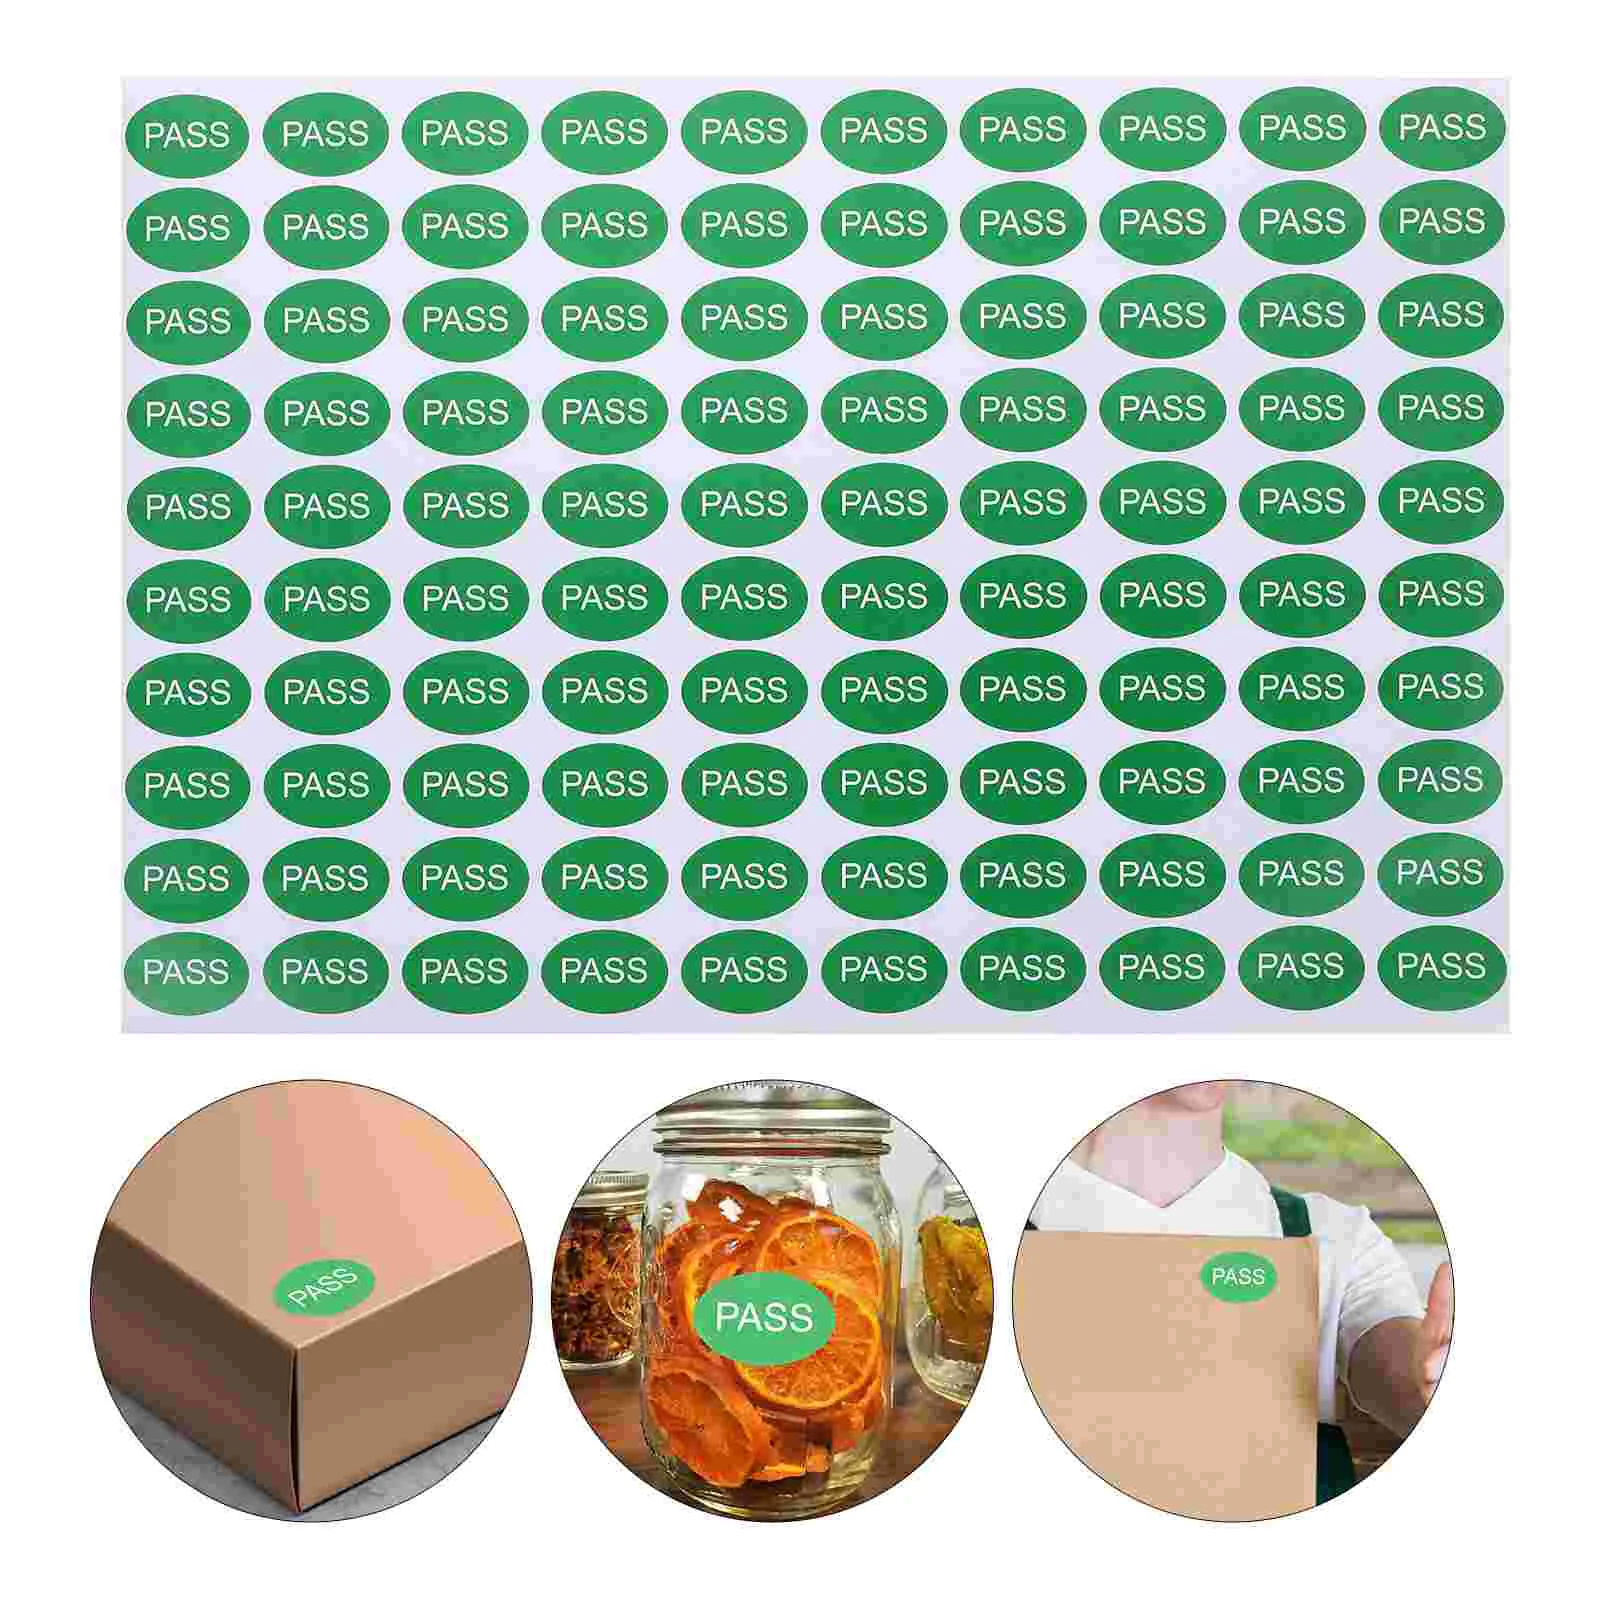 

2000Pcs QC Passed Labels Warehouse Quality Stickers Self Adhesive Passed Stickers Check Tested Stickers